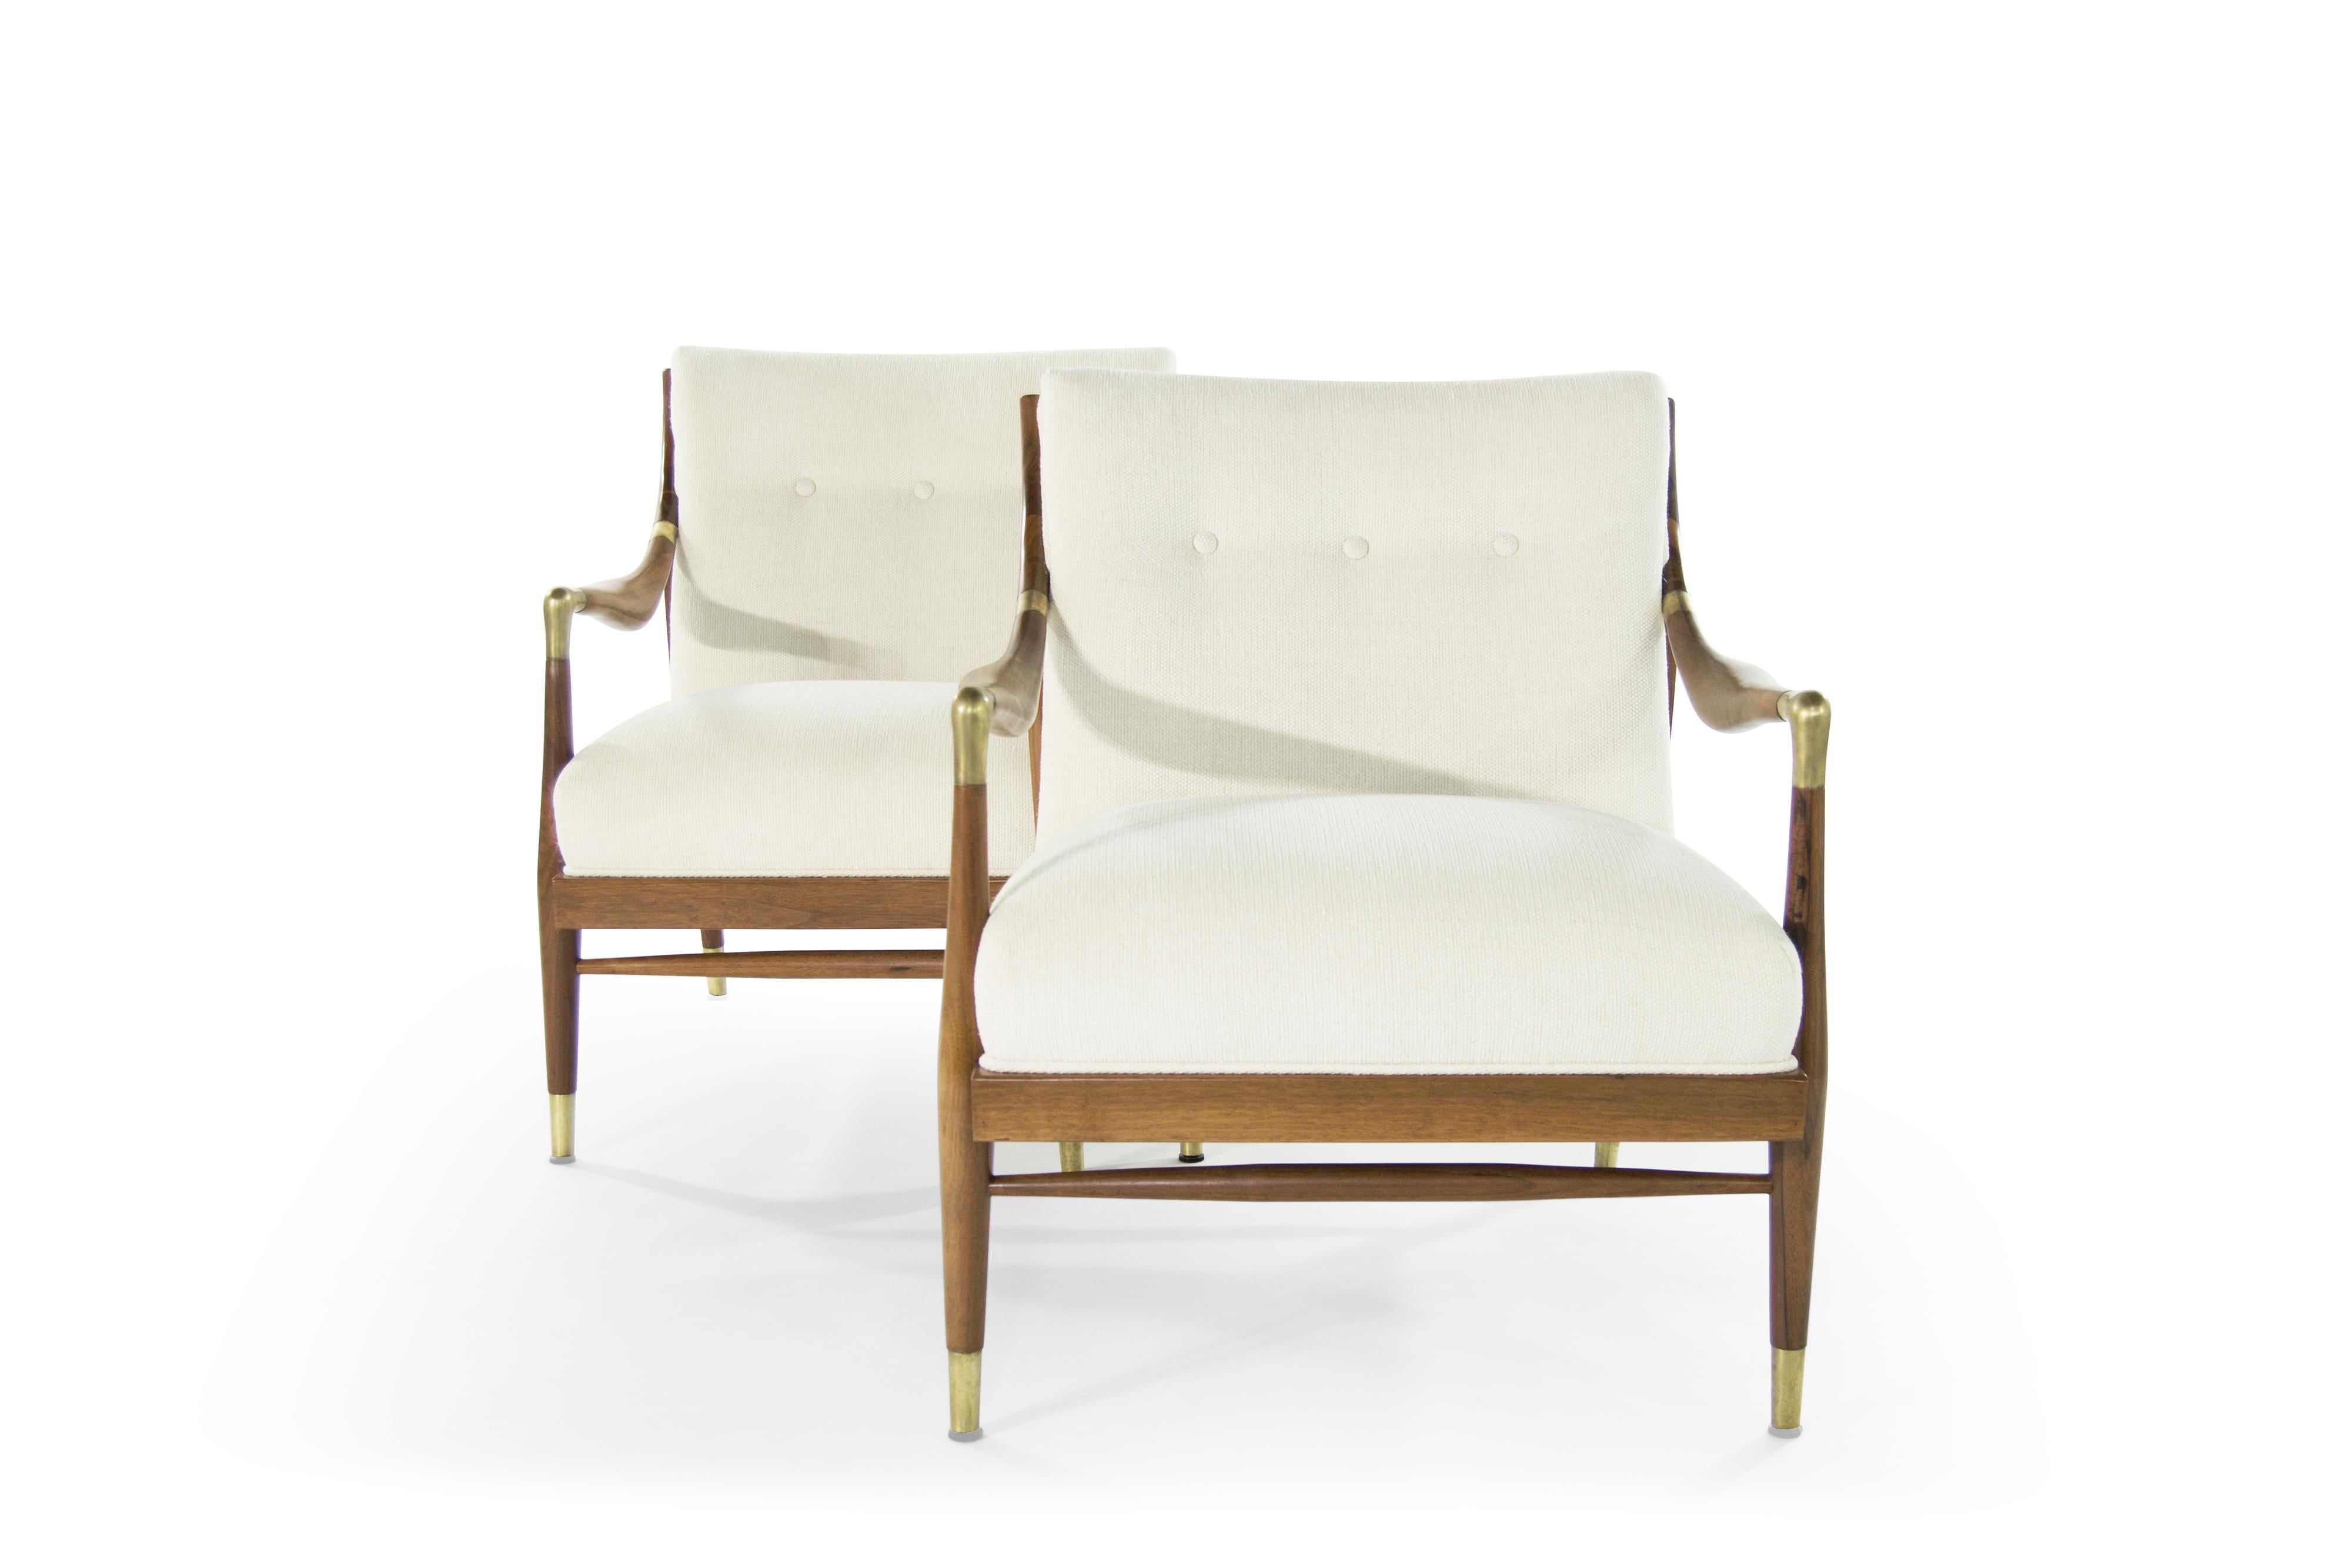 20th Century Gio Ponti Style Brass Accented Walnut Lounge Chairs